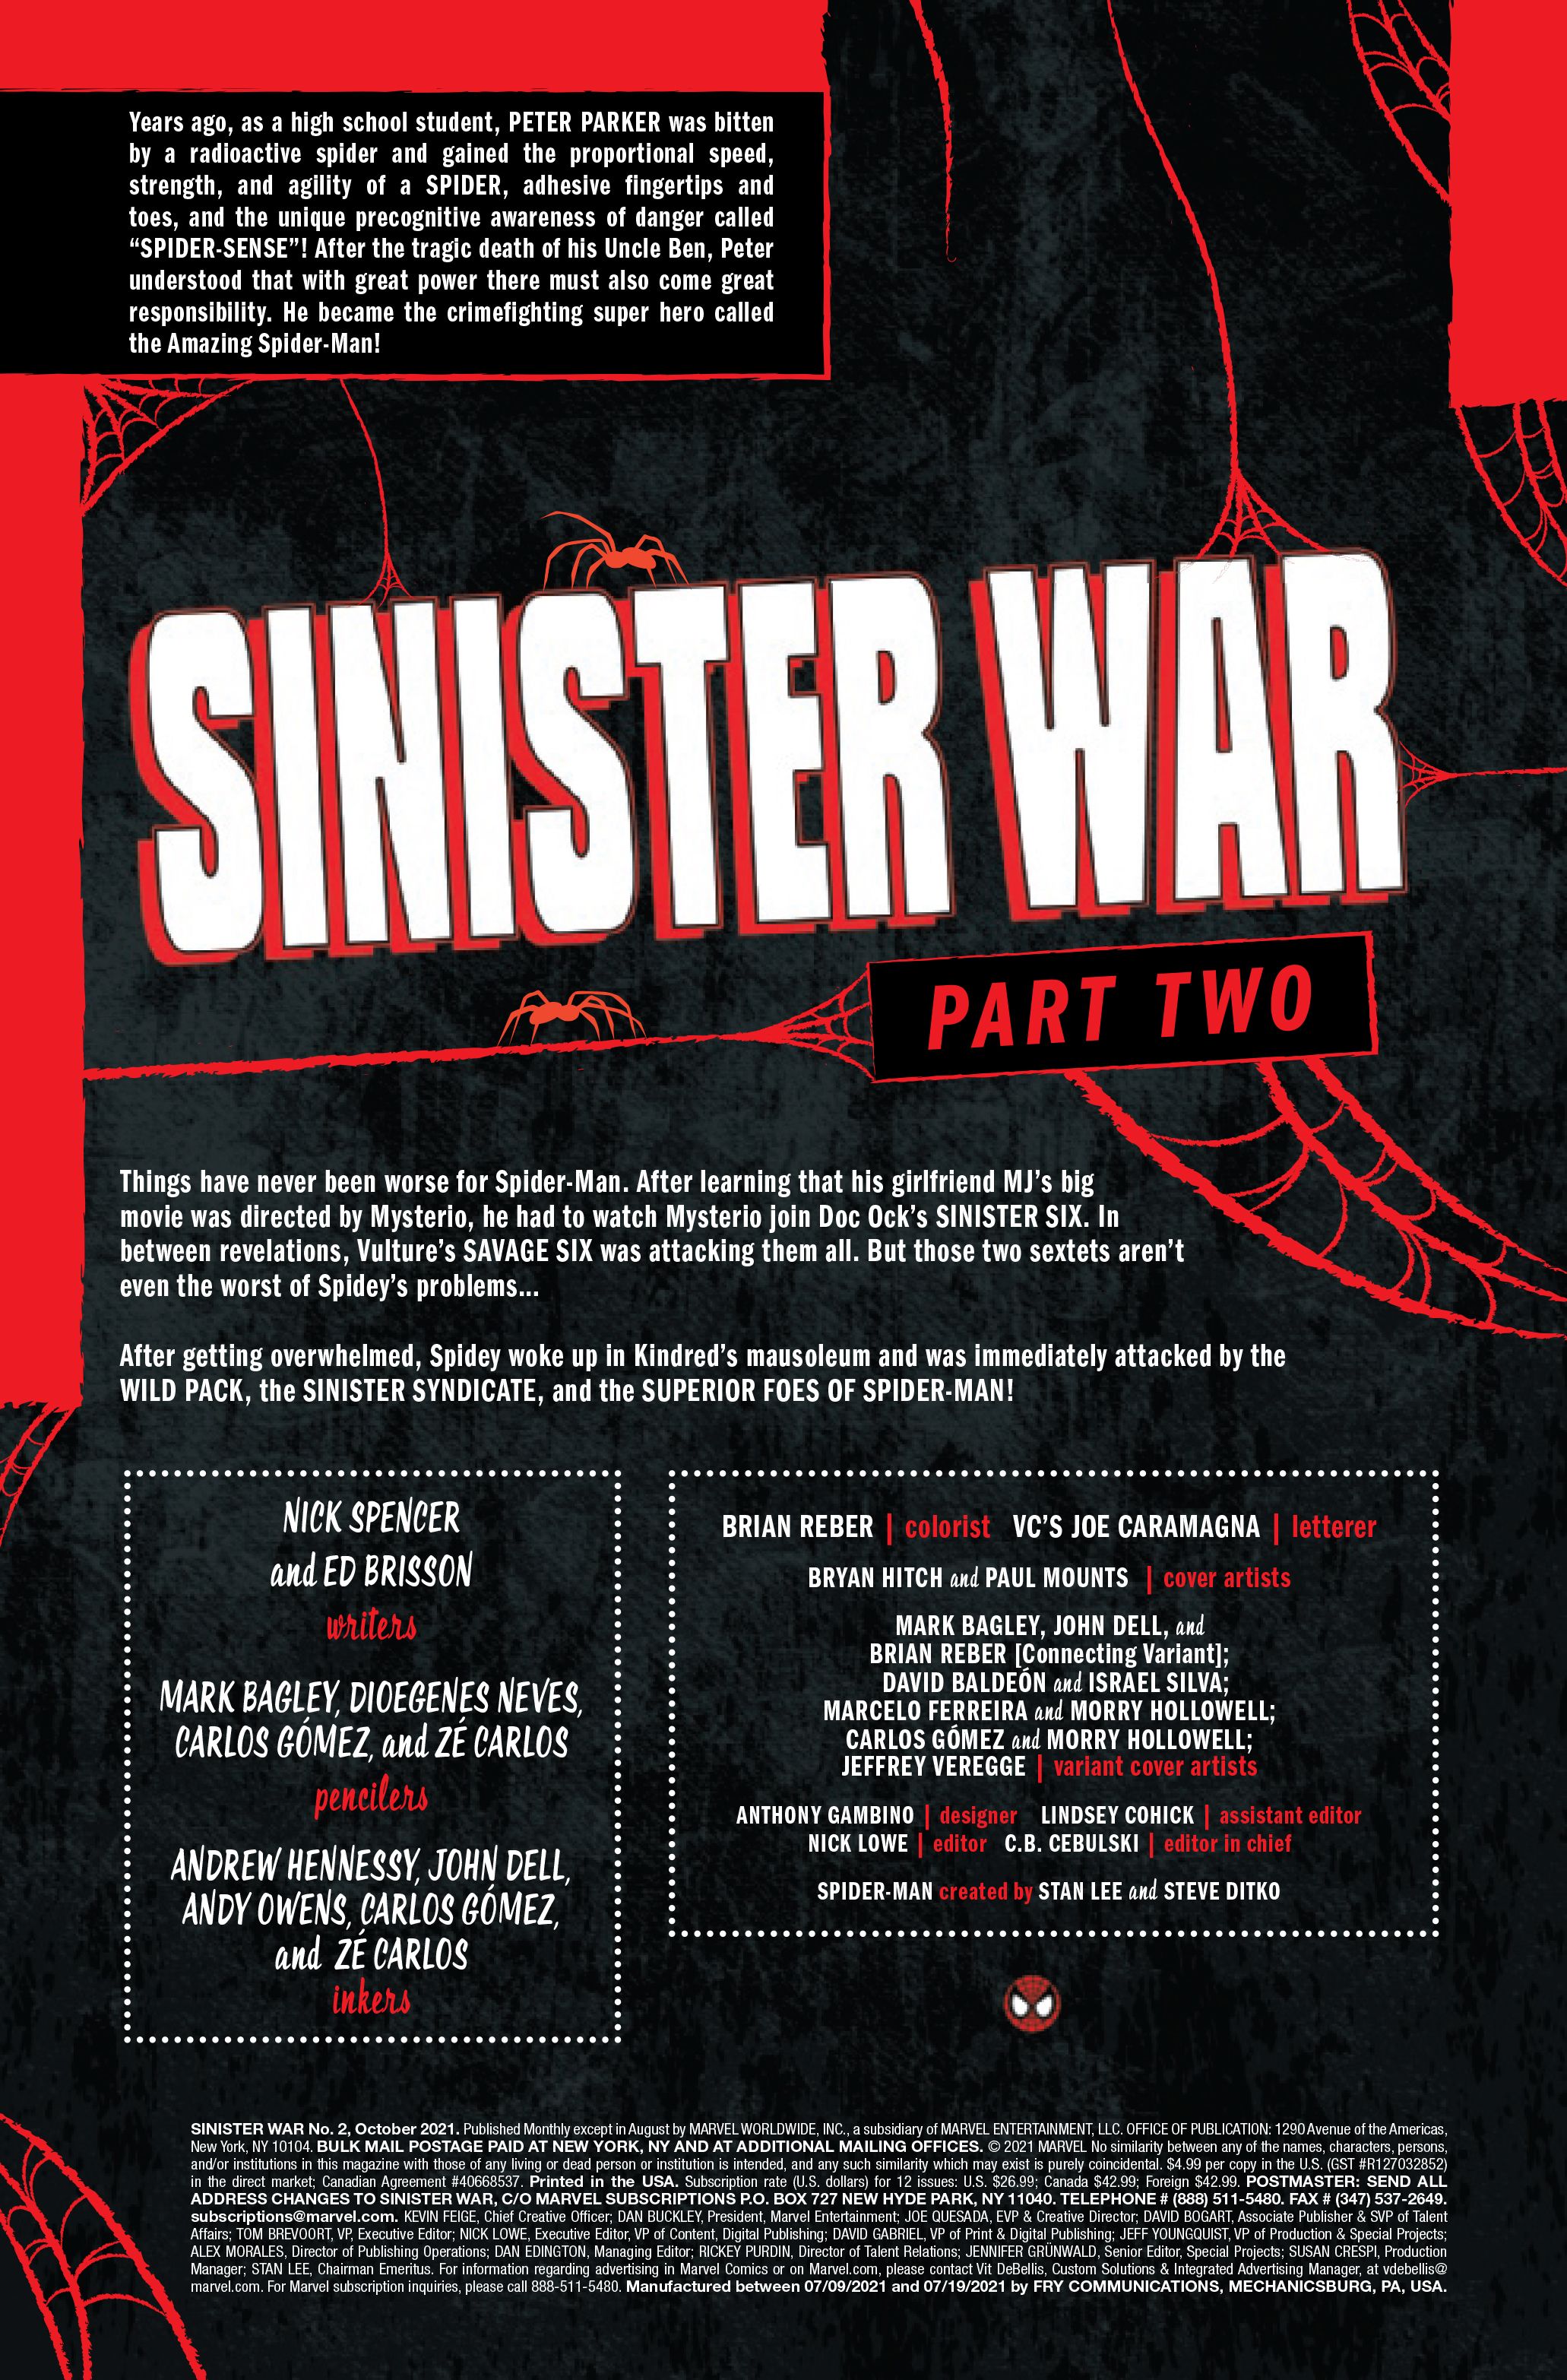 Page 1 of Marvel Comics' Sinister War #2, by Nick Spencer, Ed Brisson, Mark Bagley, Diogenes Neves, Carlos Gomez, Ze Carlos, Andrew Hennessy, John Dell, Andy Owens, Brian Reber and VC's Joe Caramagna.